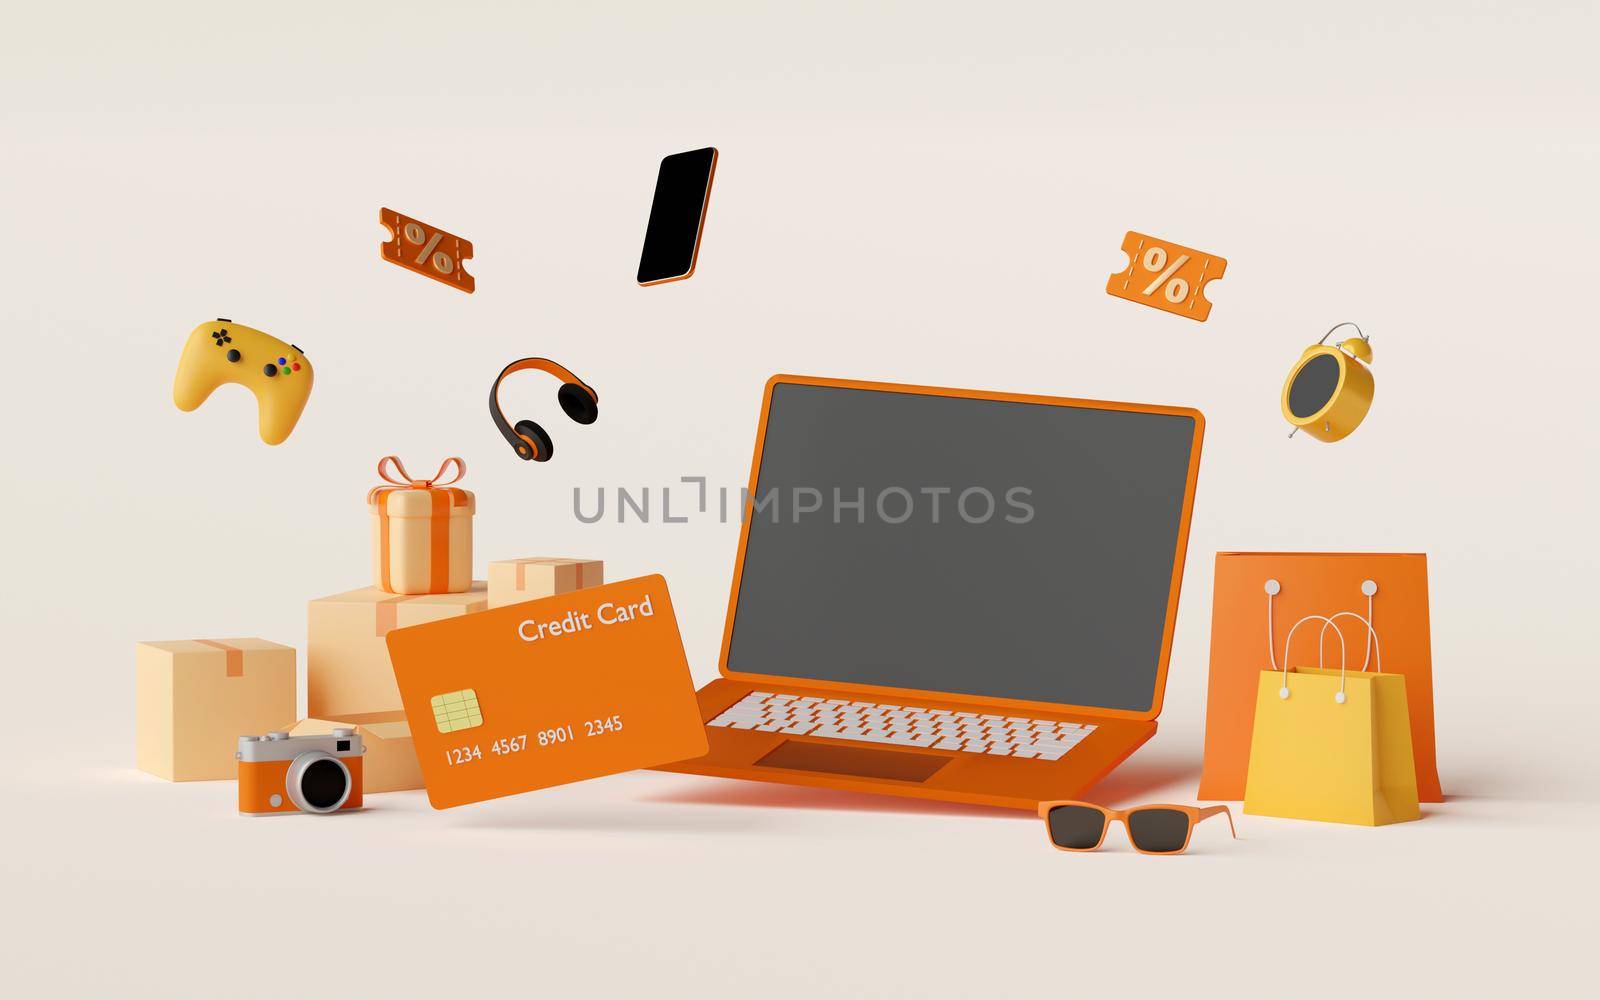 3d illustration of Shopping online with credit card concept, blank screen laptop with credit card, parcel box and items